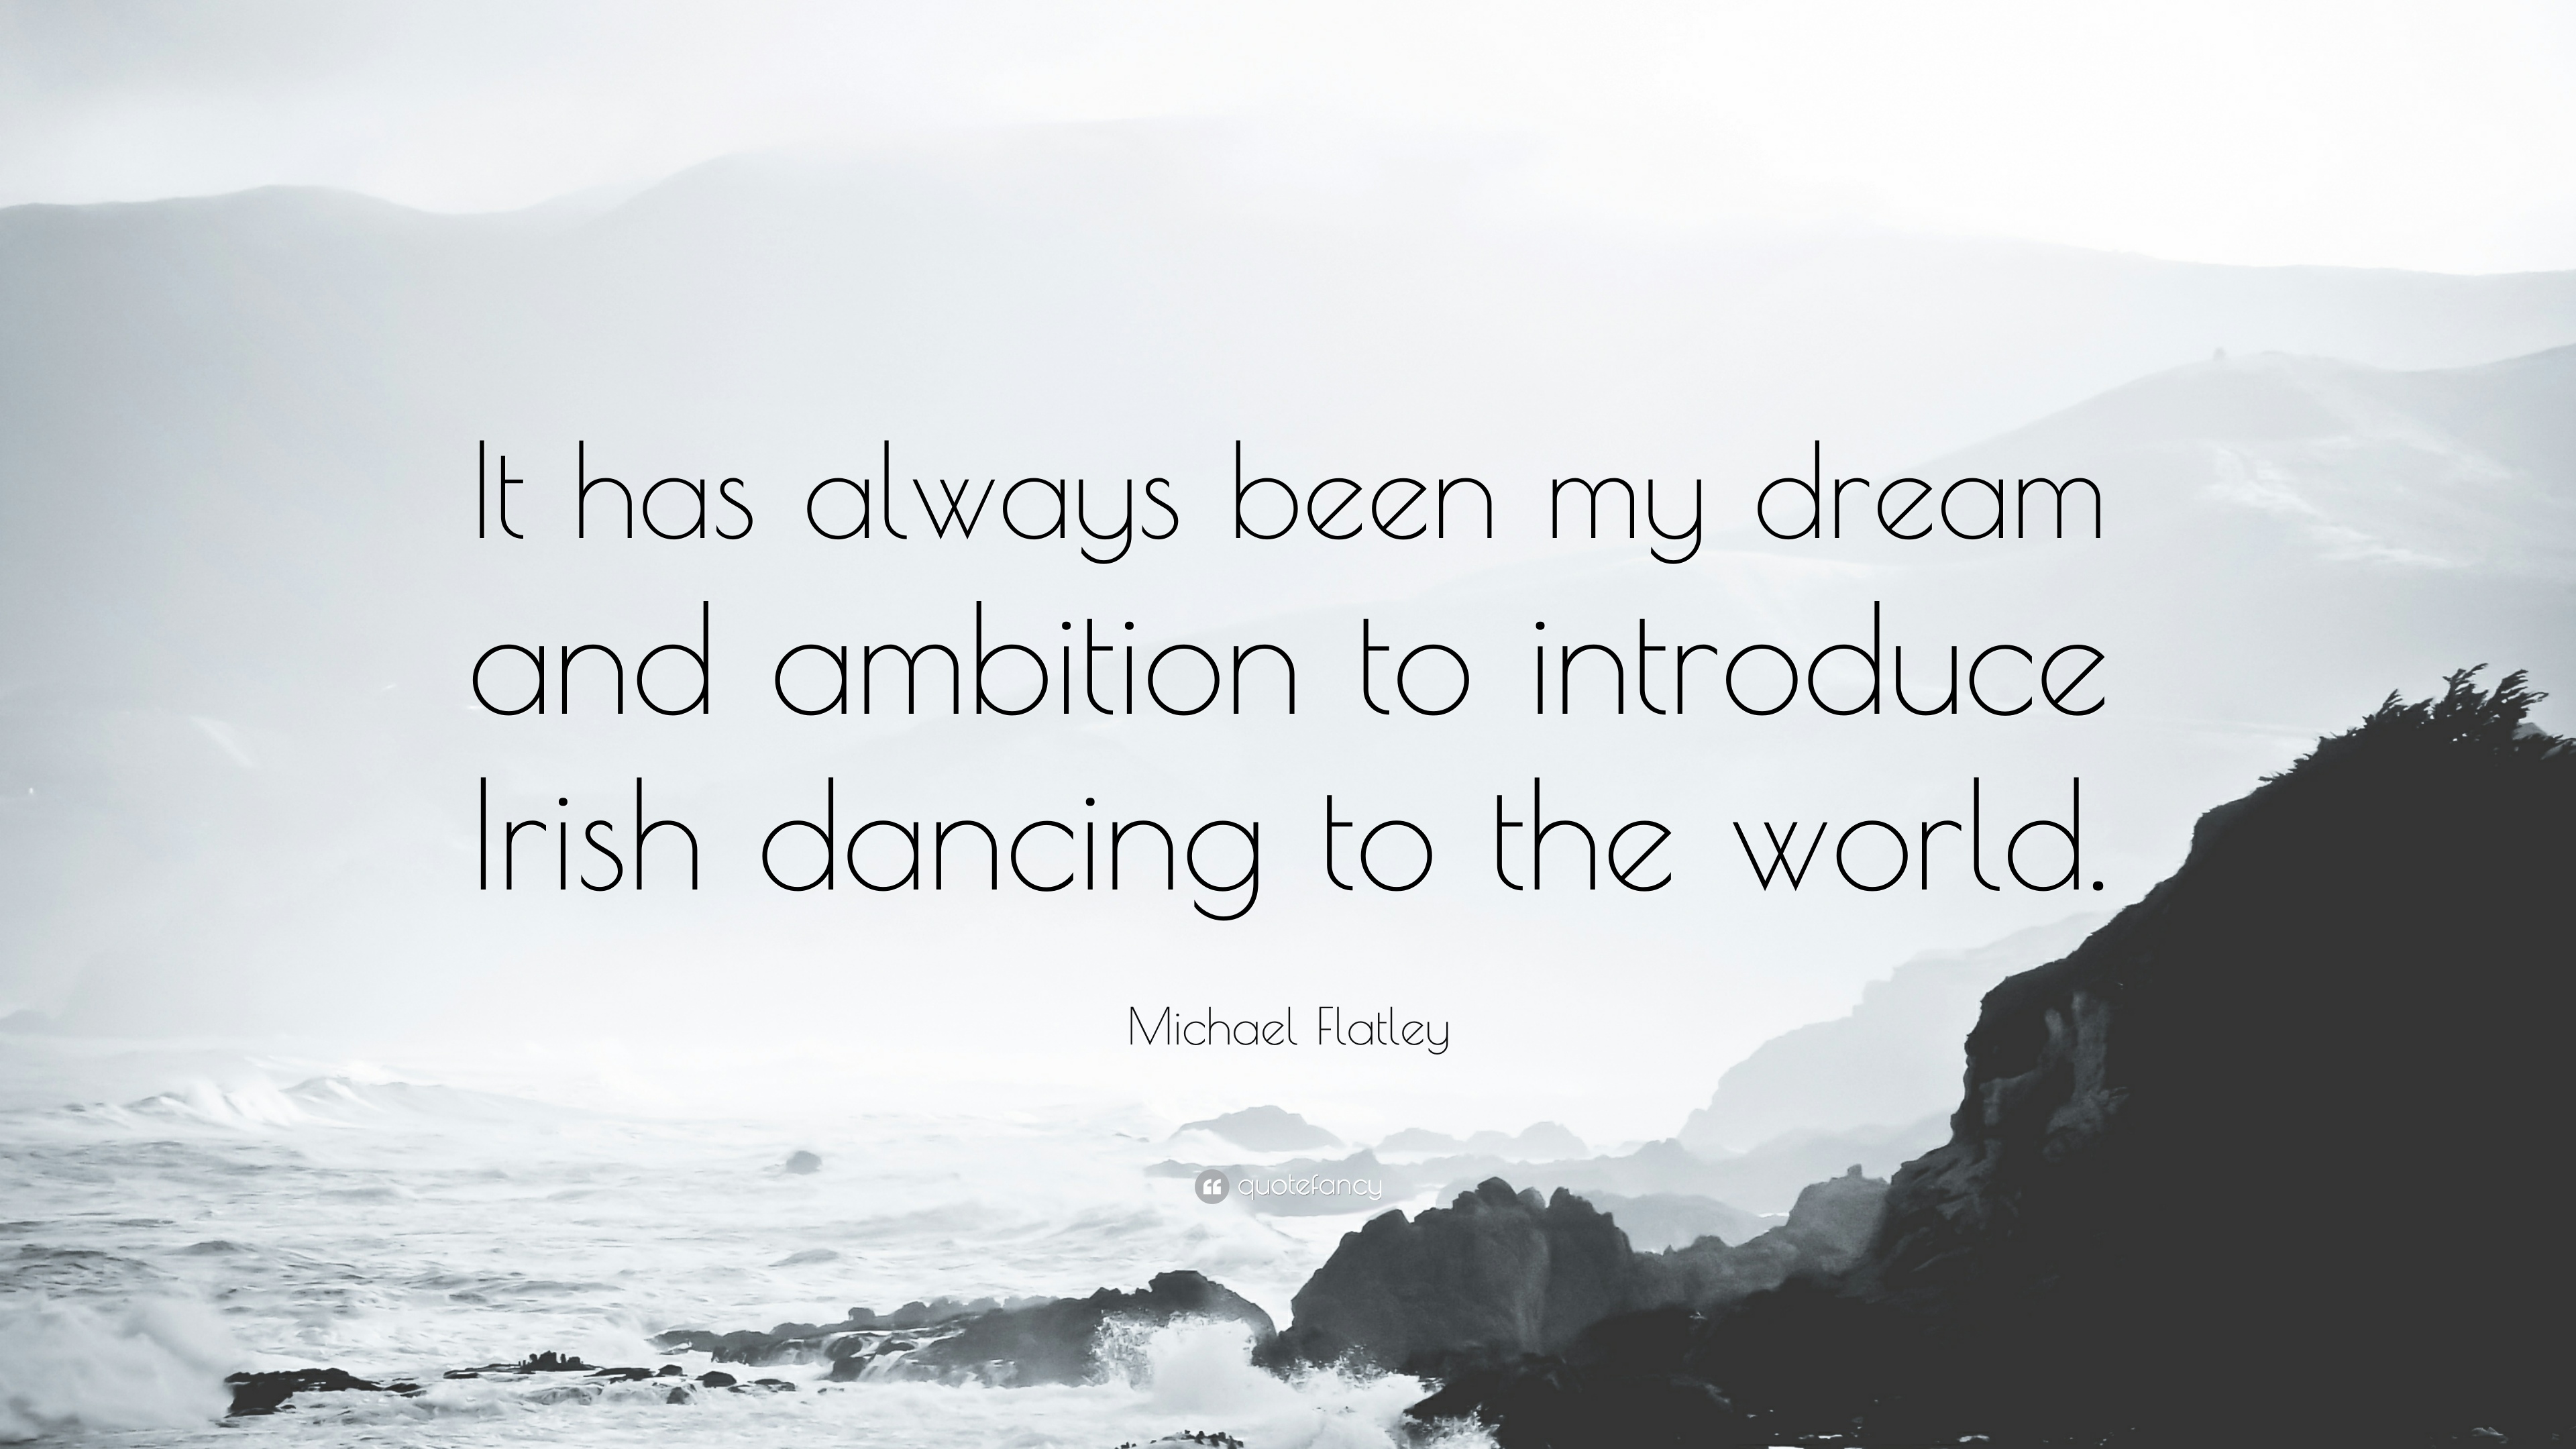 Michael Flatley Quote: “It has always been my dream and ambition